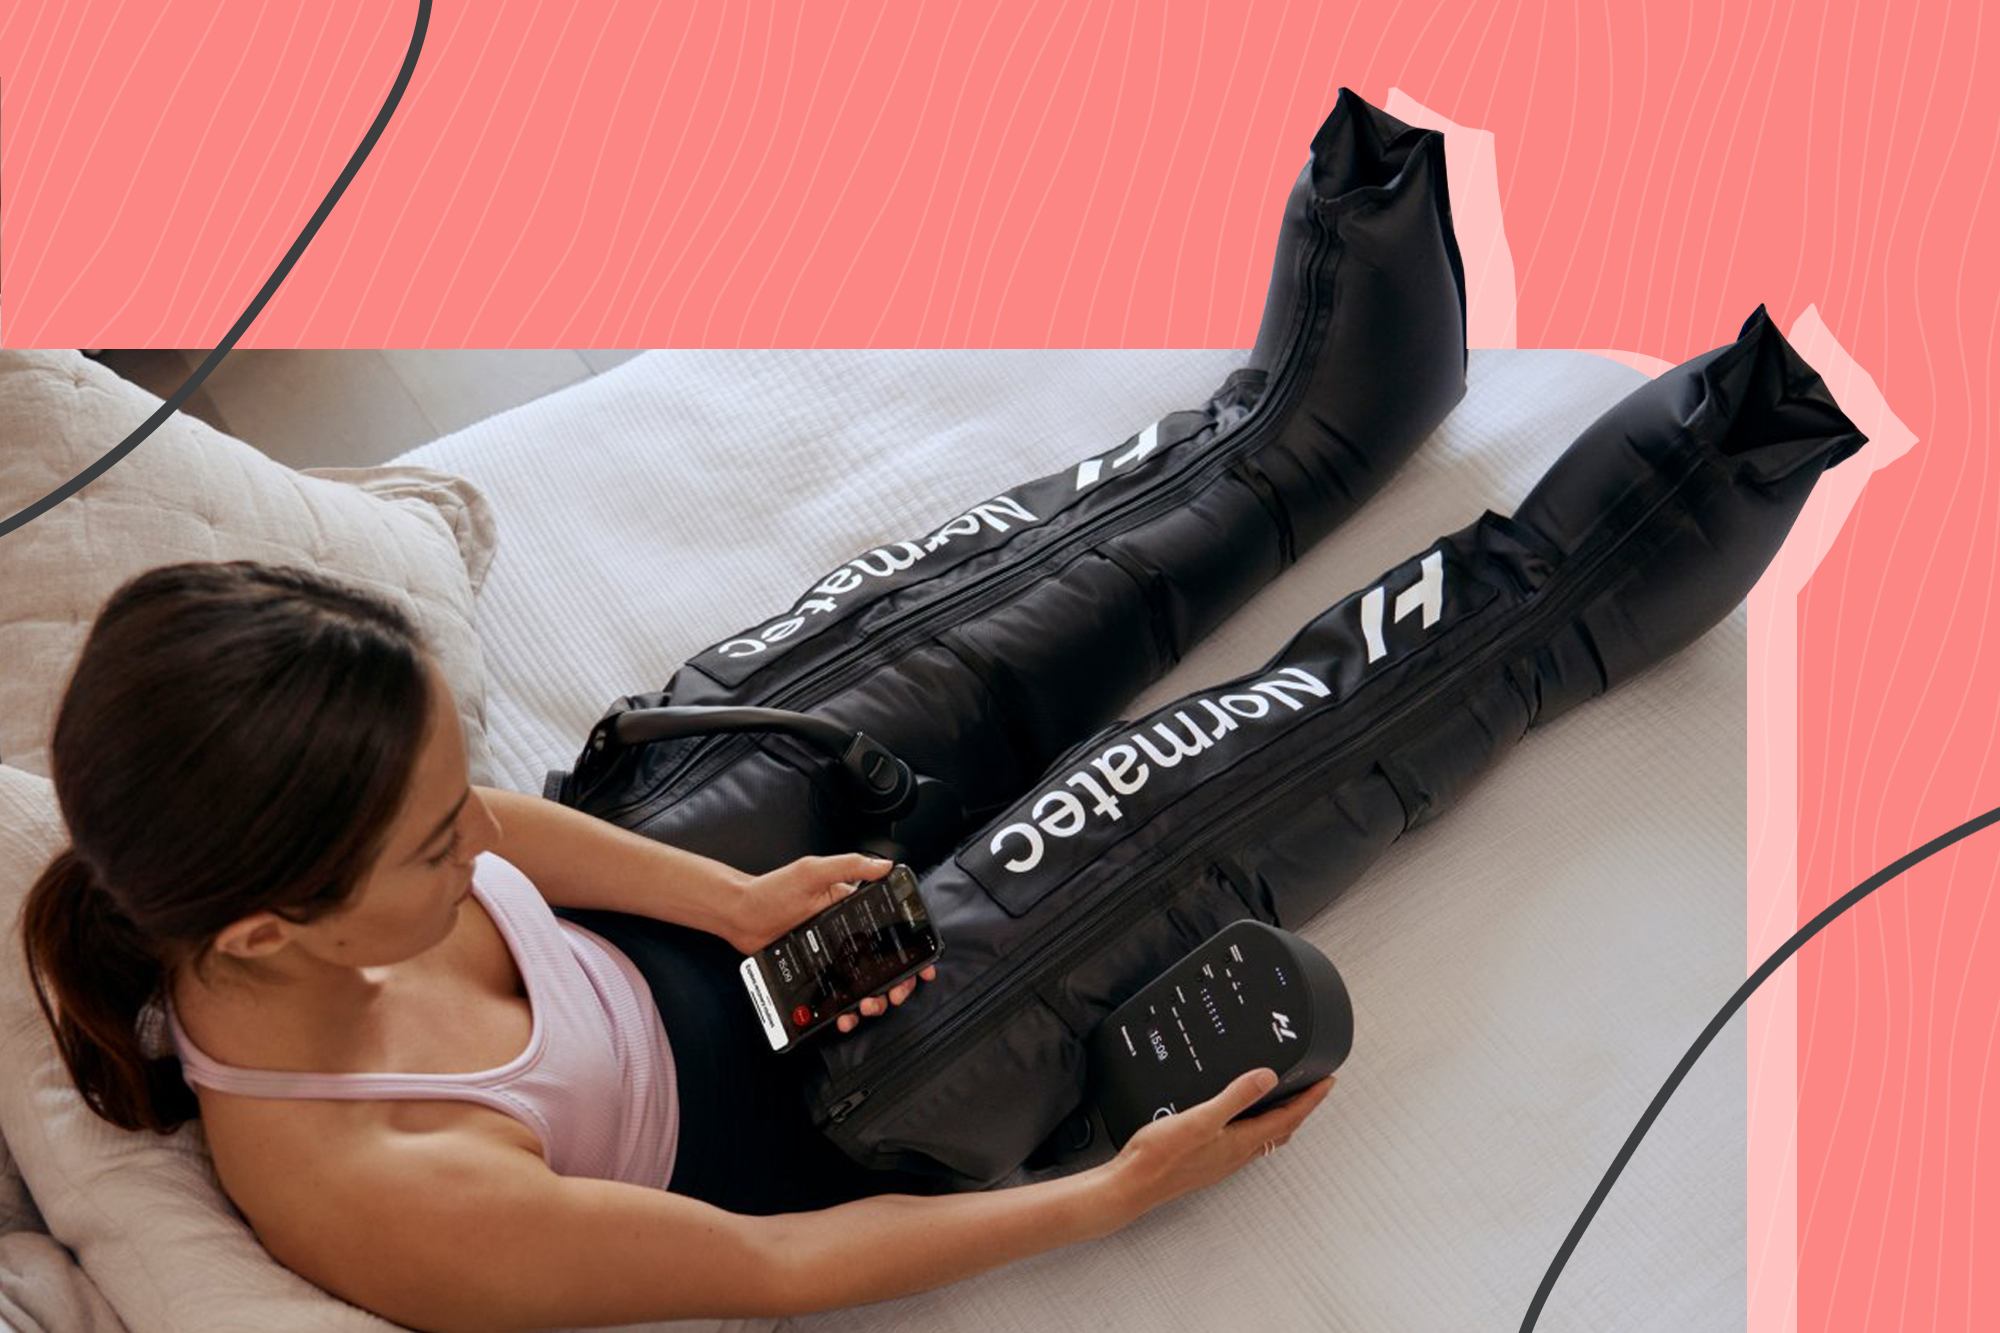 The Normatec 3 compression boots can give you a massage after